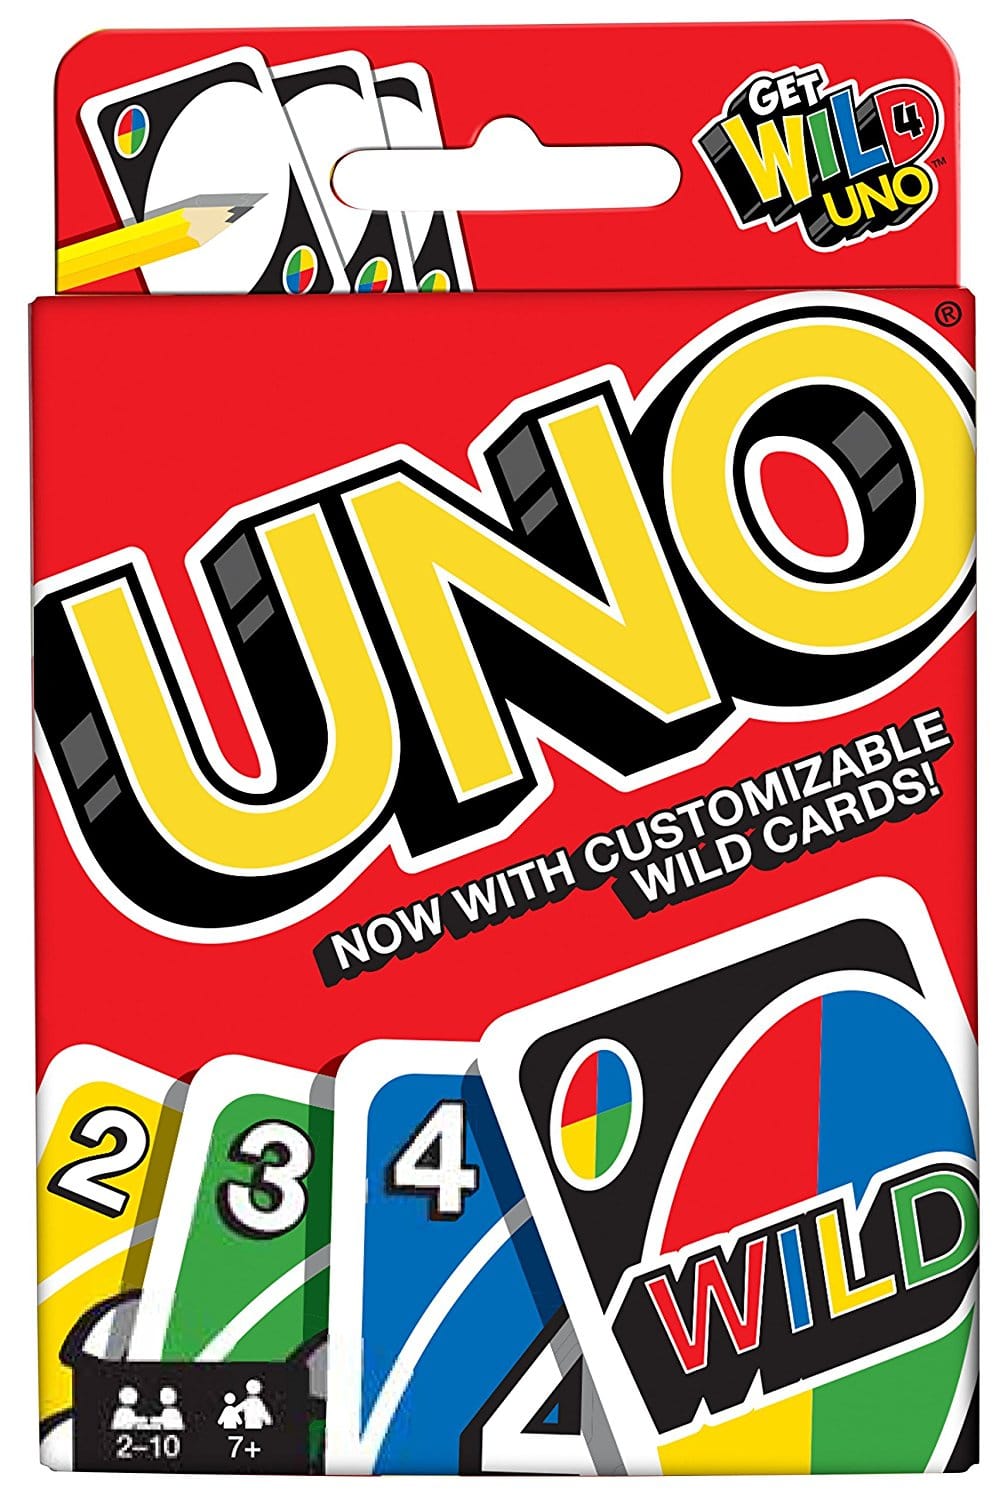 What to pack for monsoon travel - Uno cards